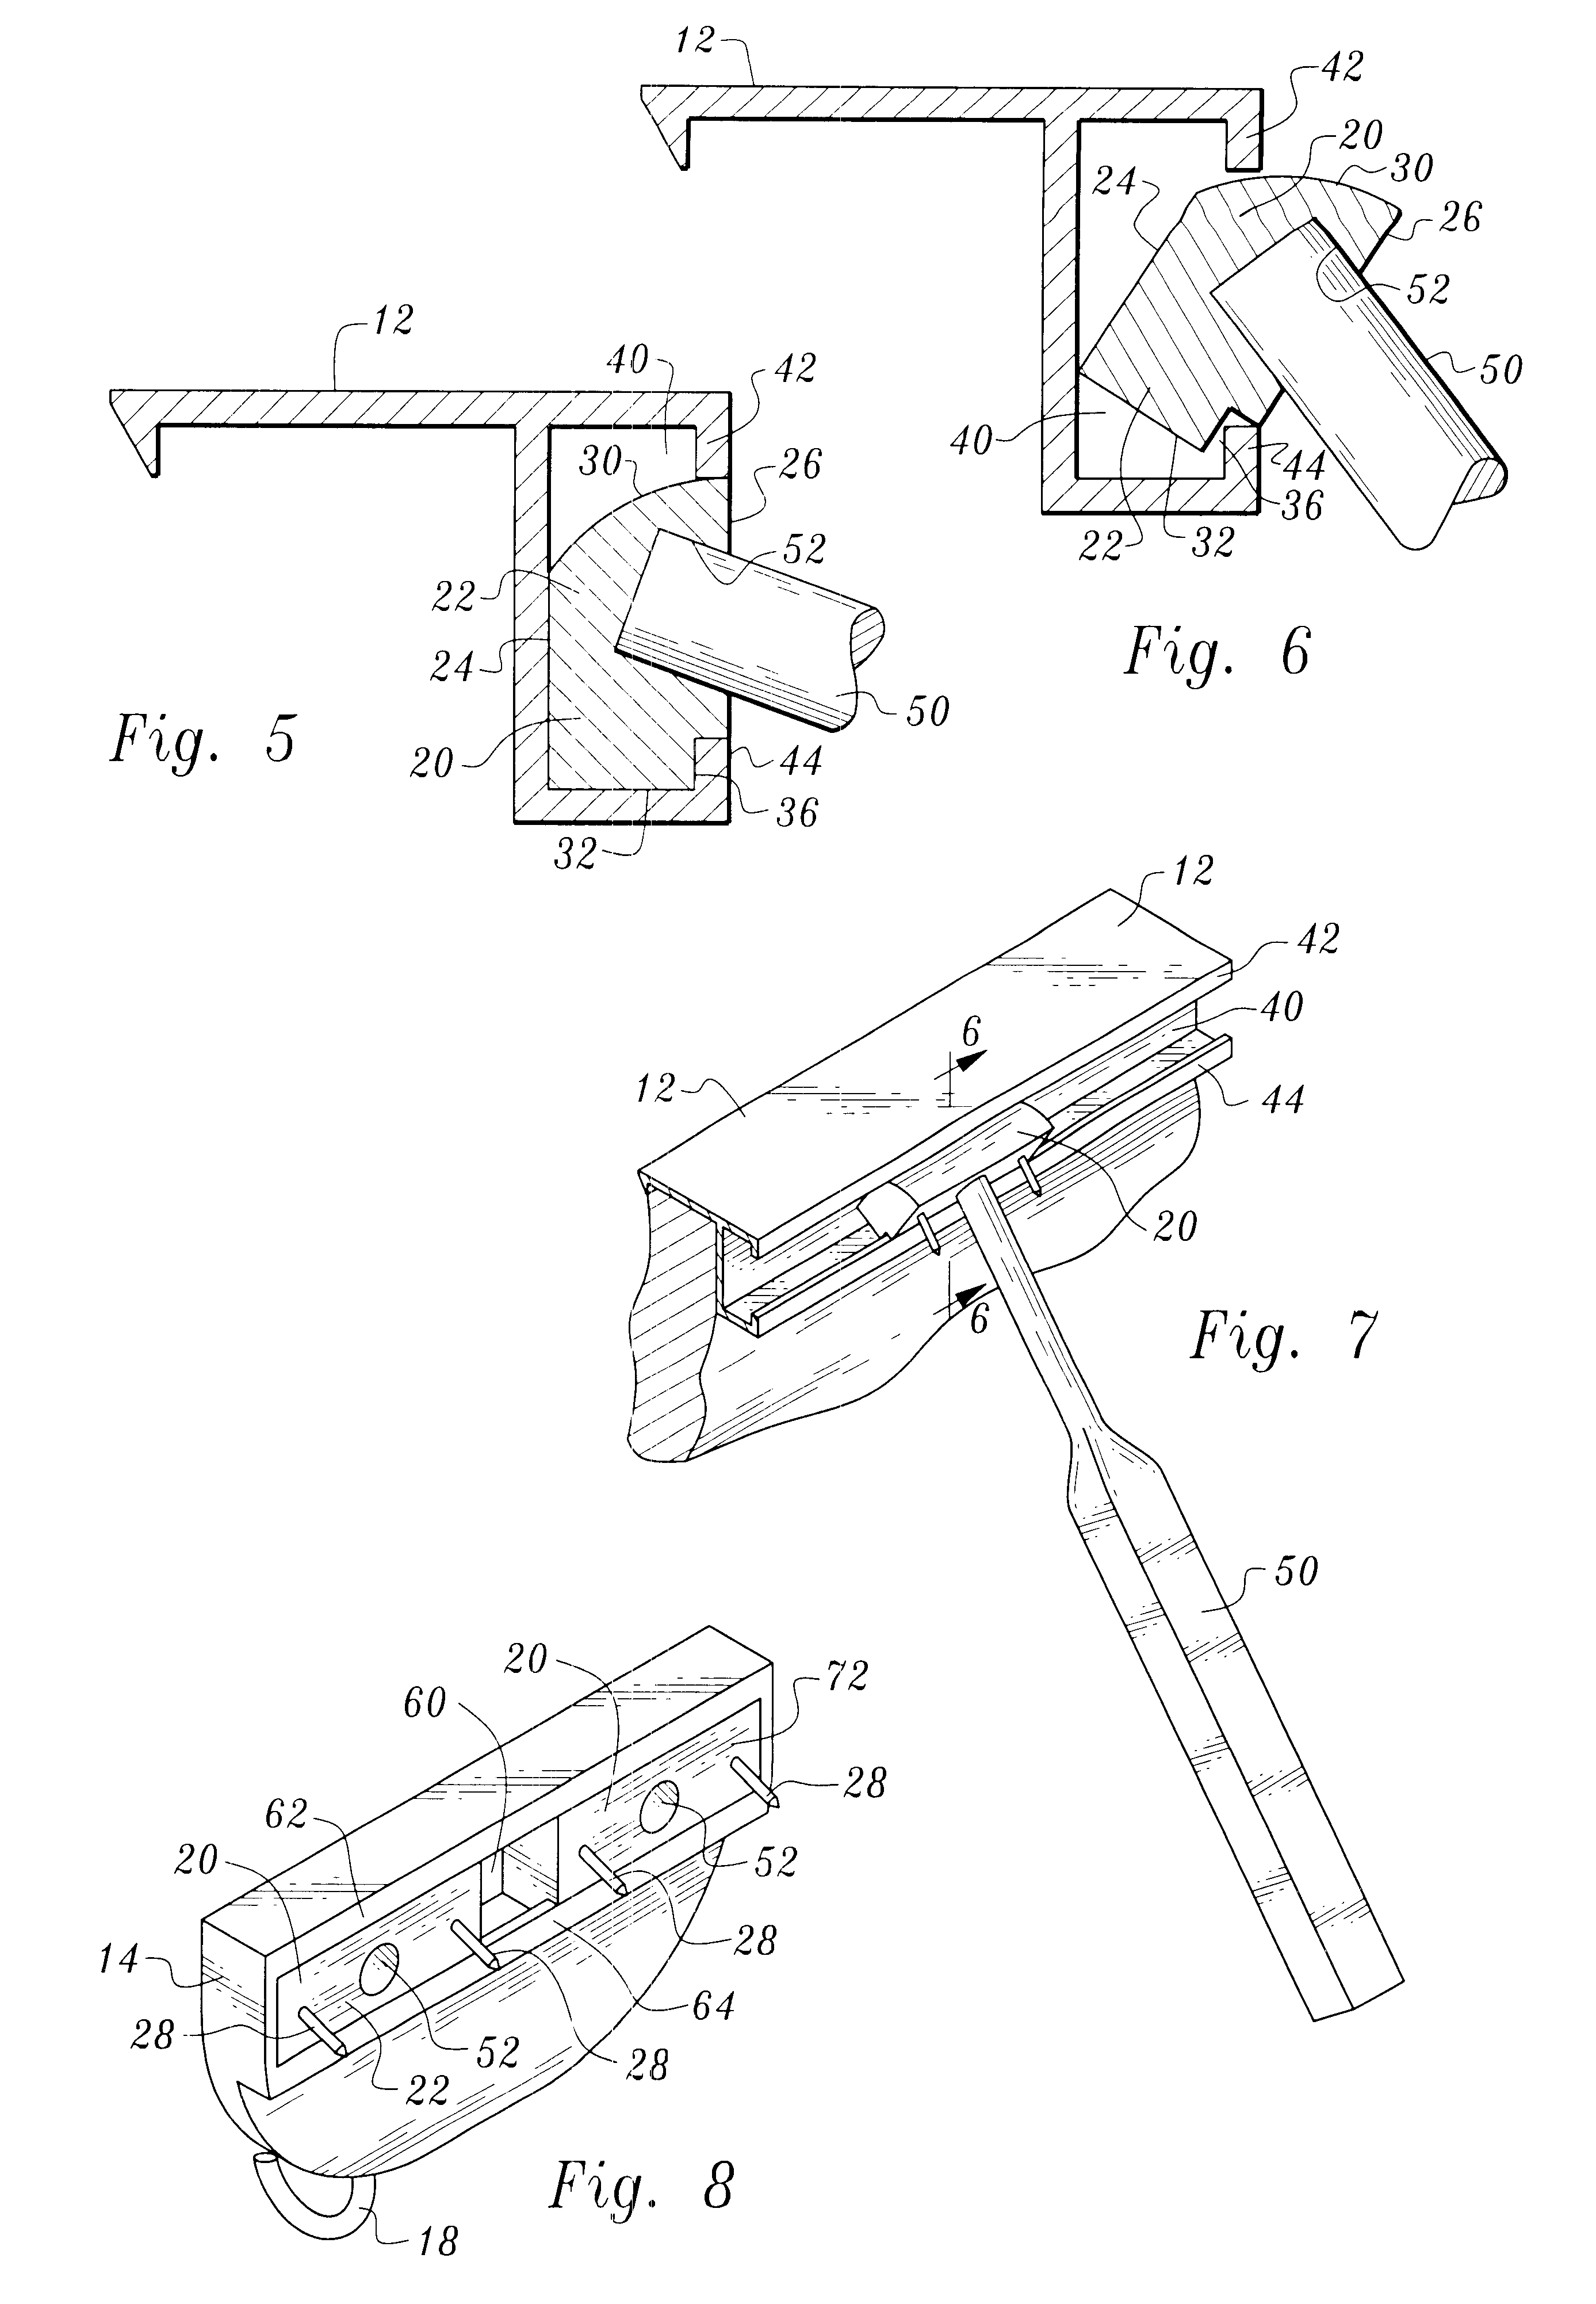 Support device for supporting frames and other objects from a structure